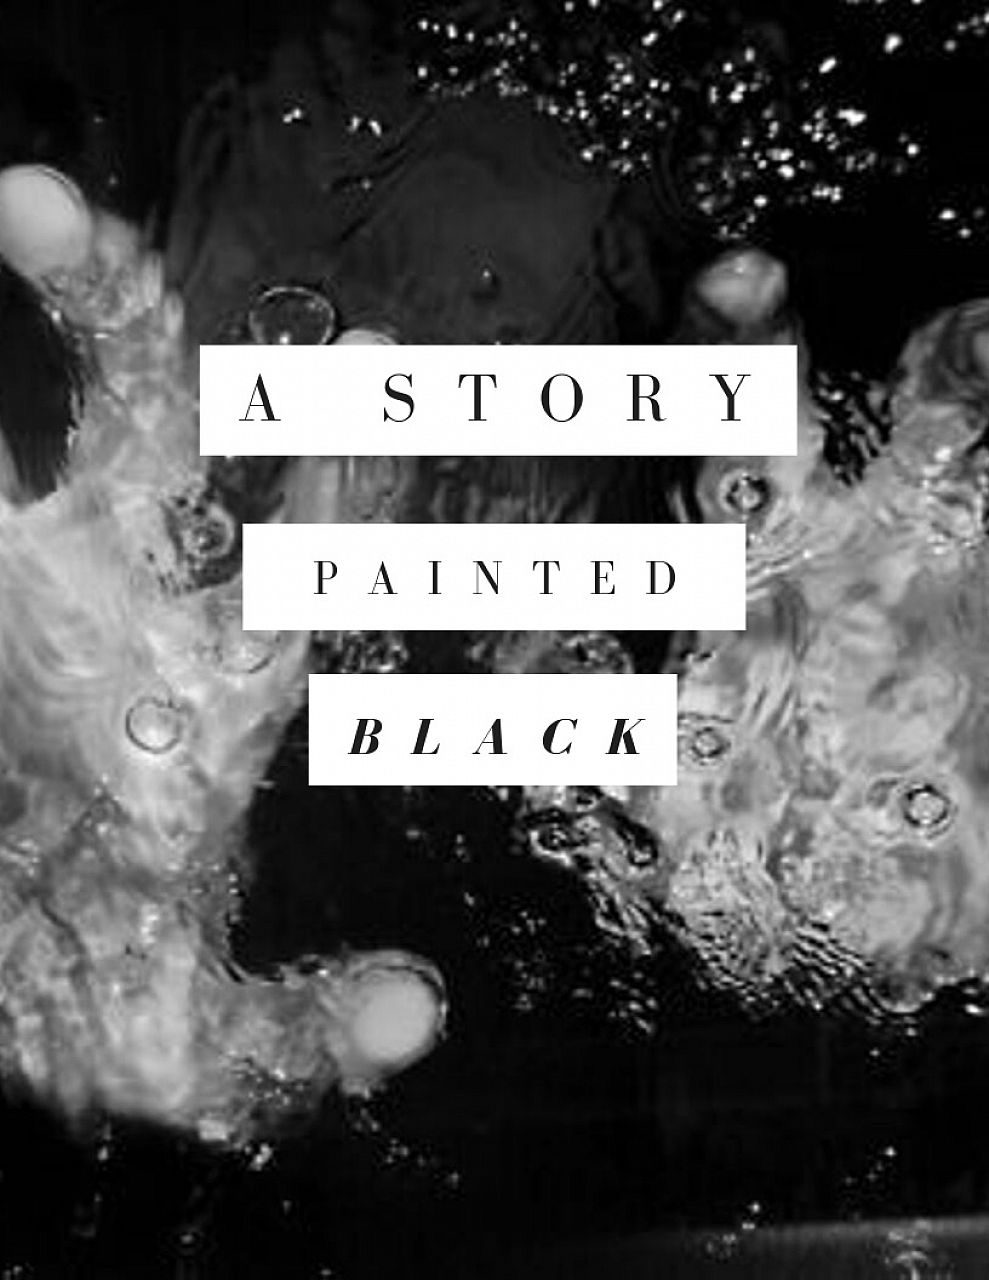 A story painted Black